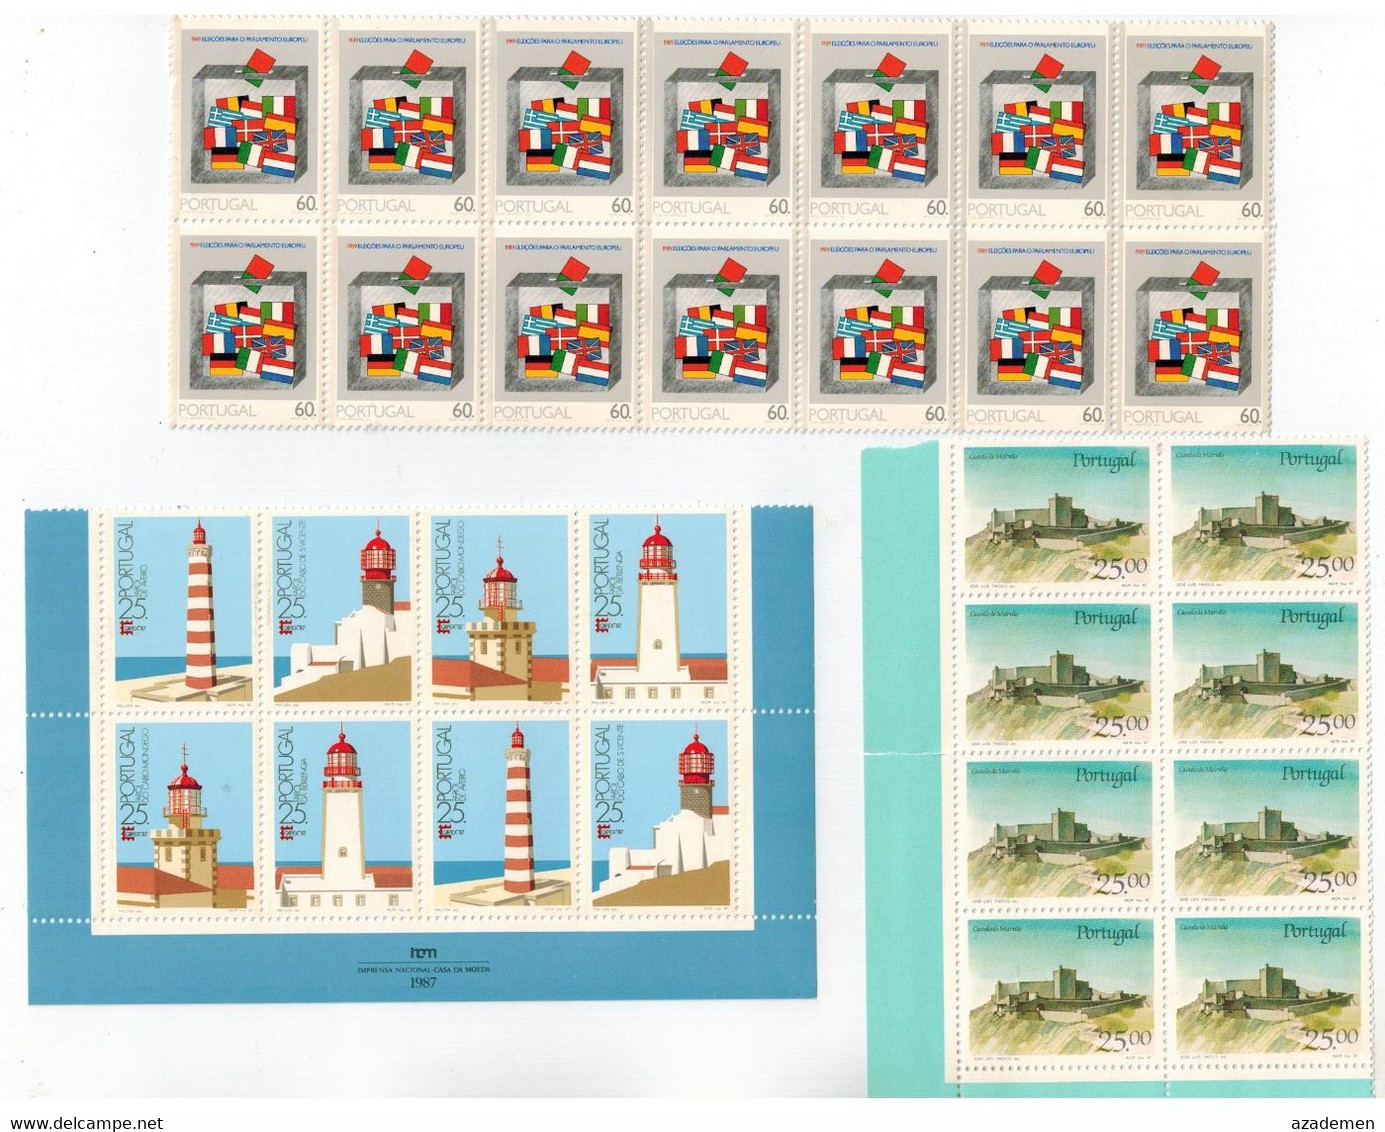 PORTUGAL 180 timbres neufs